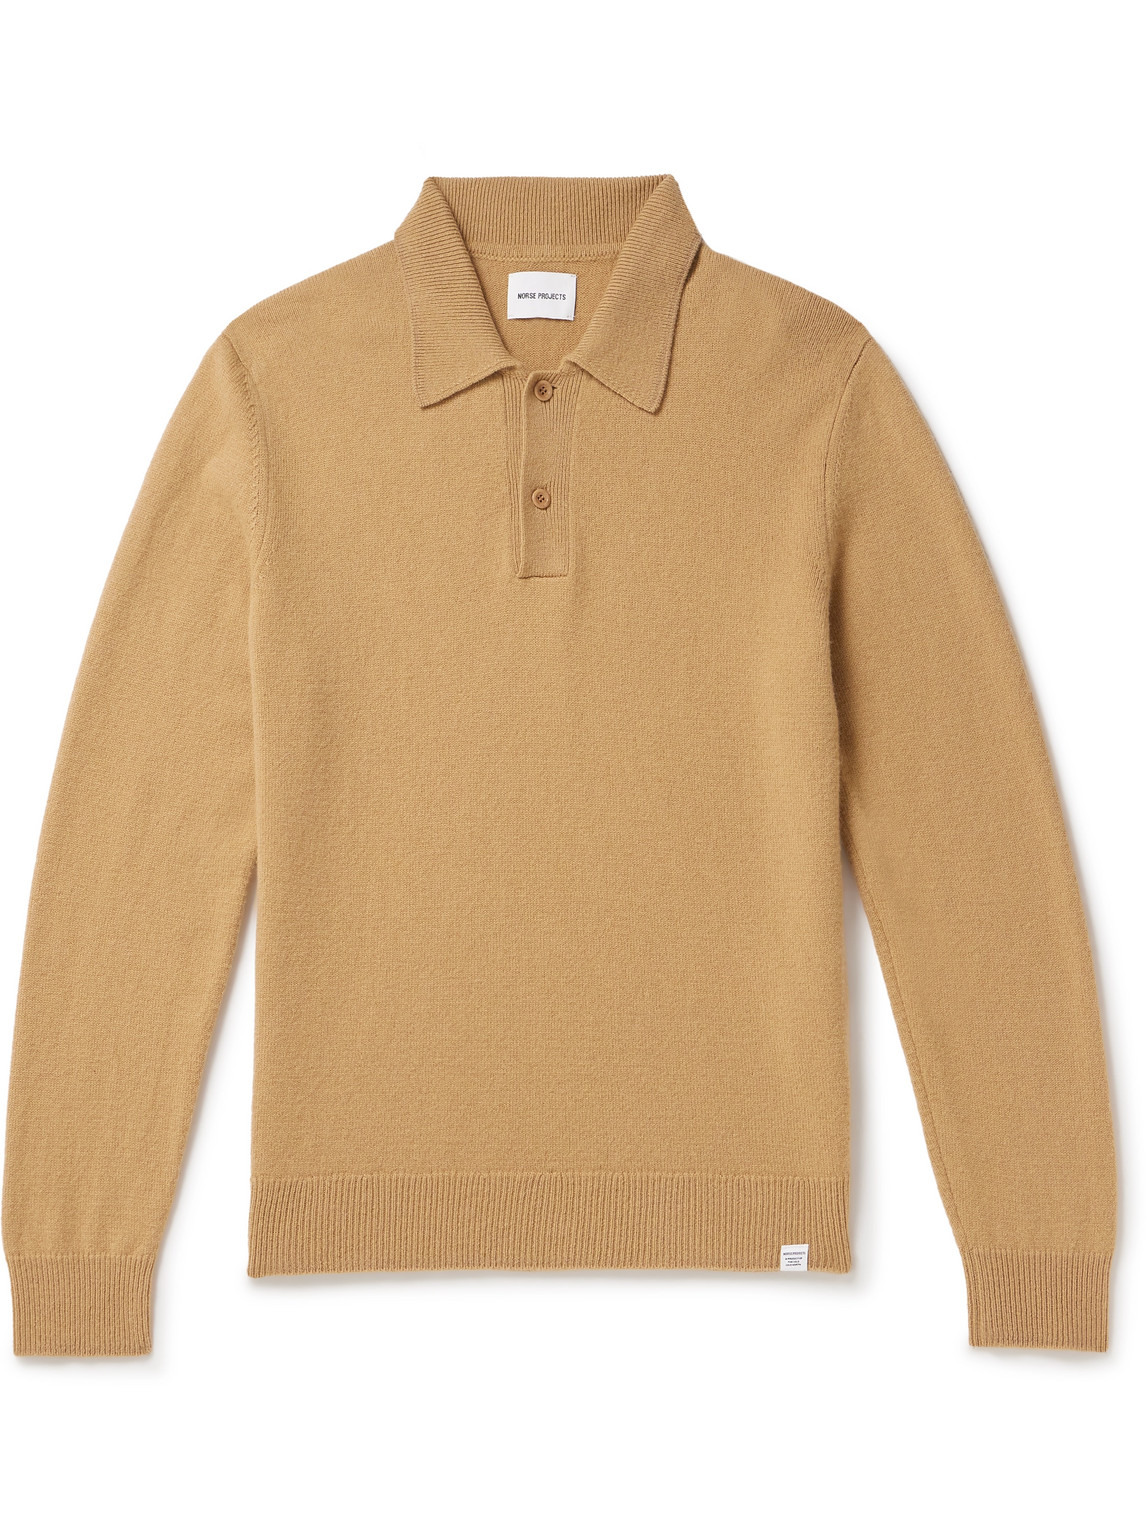 Norse Projects - Marco Wool Polo Shirt - Men - Brown - S von Norse Projects